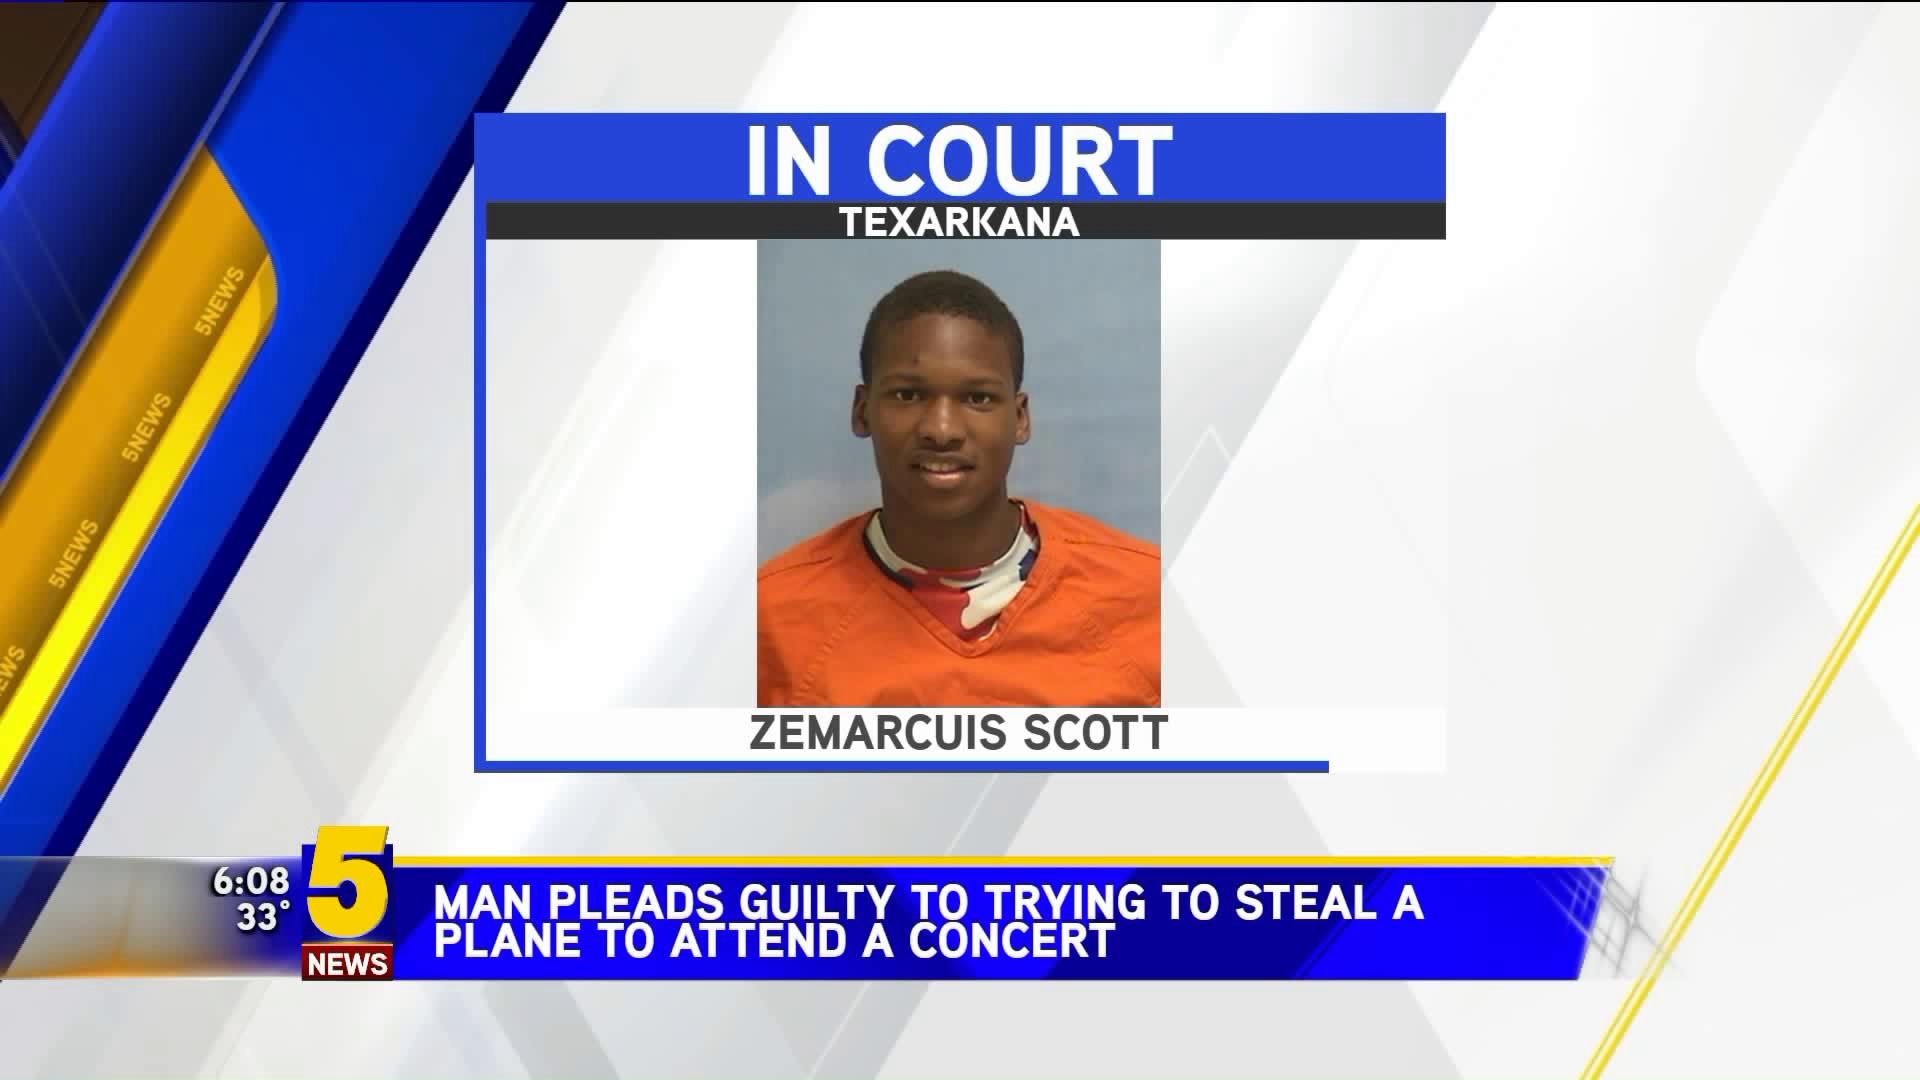 Arkansas Man Pleads Guilty To Trying To Steal A Plane To Attend A Concert